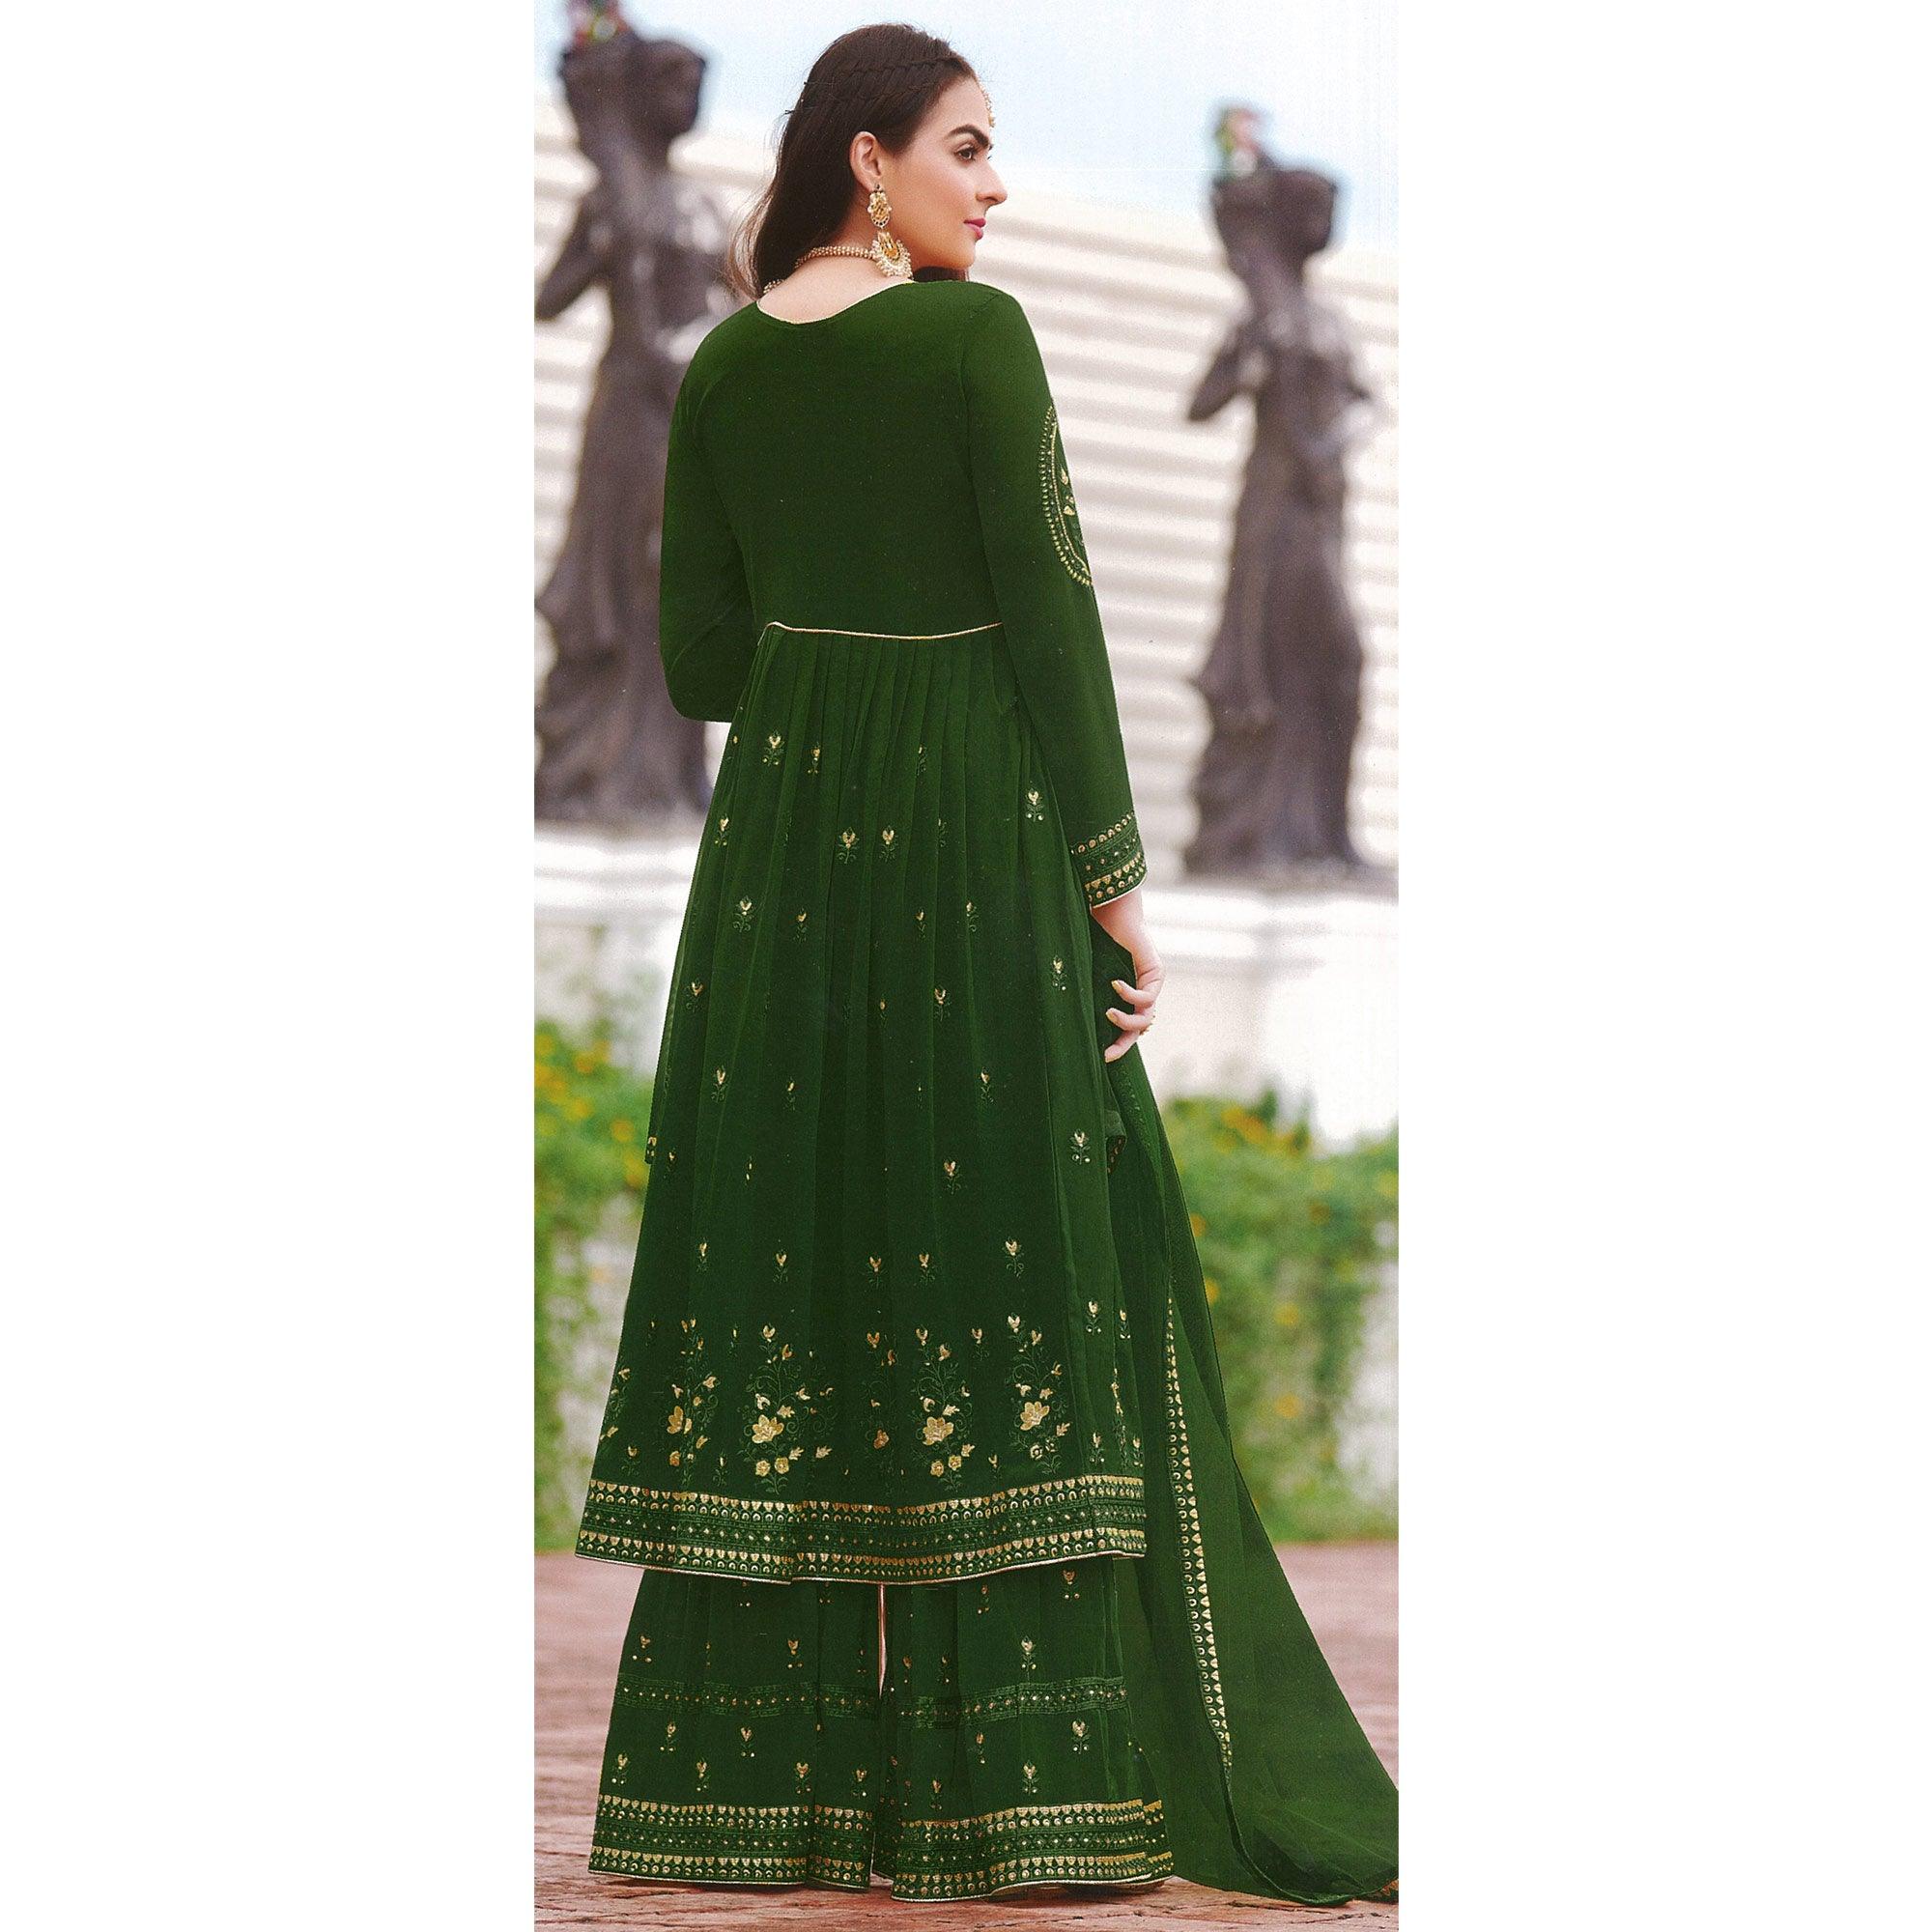 Green Partywear Embroidered Faux Georgette Salwar Suit - Peachmode